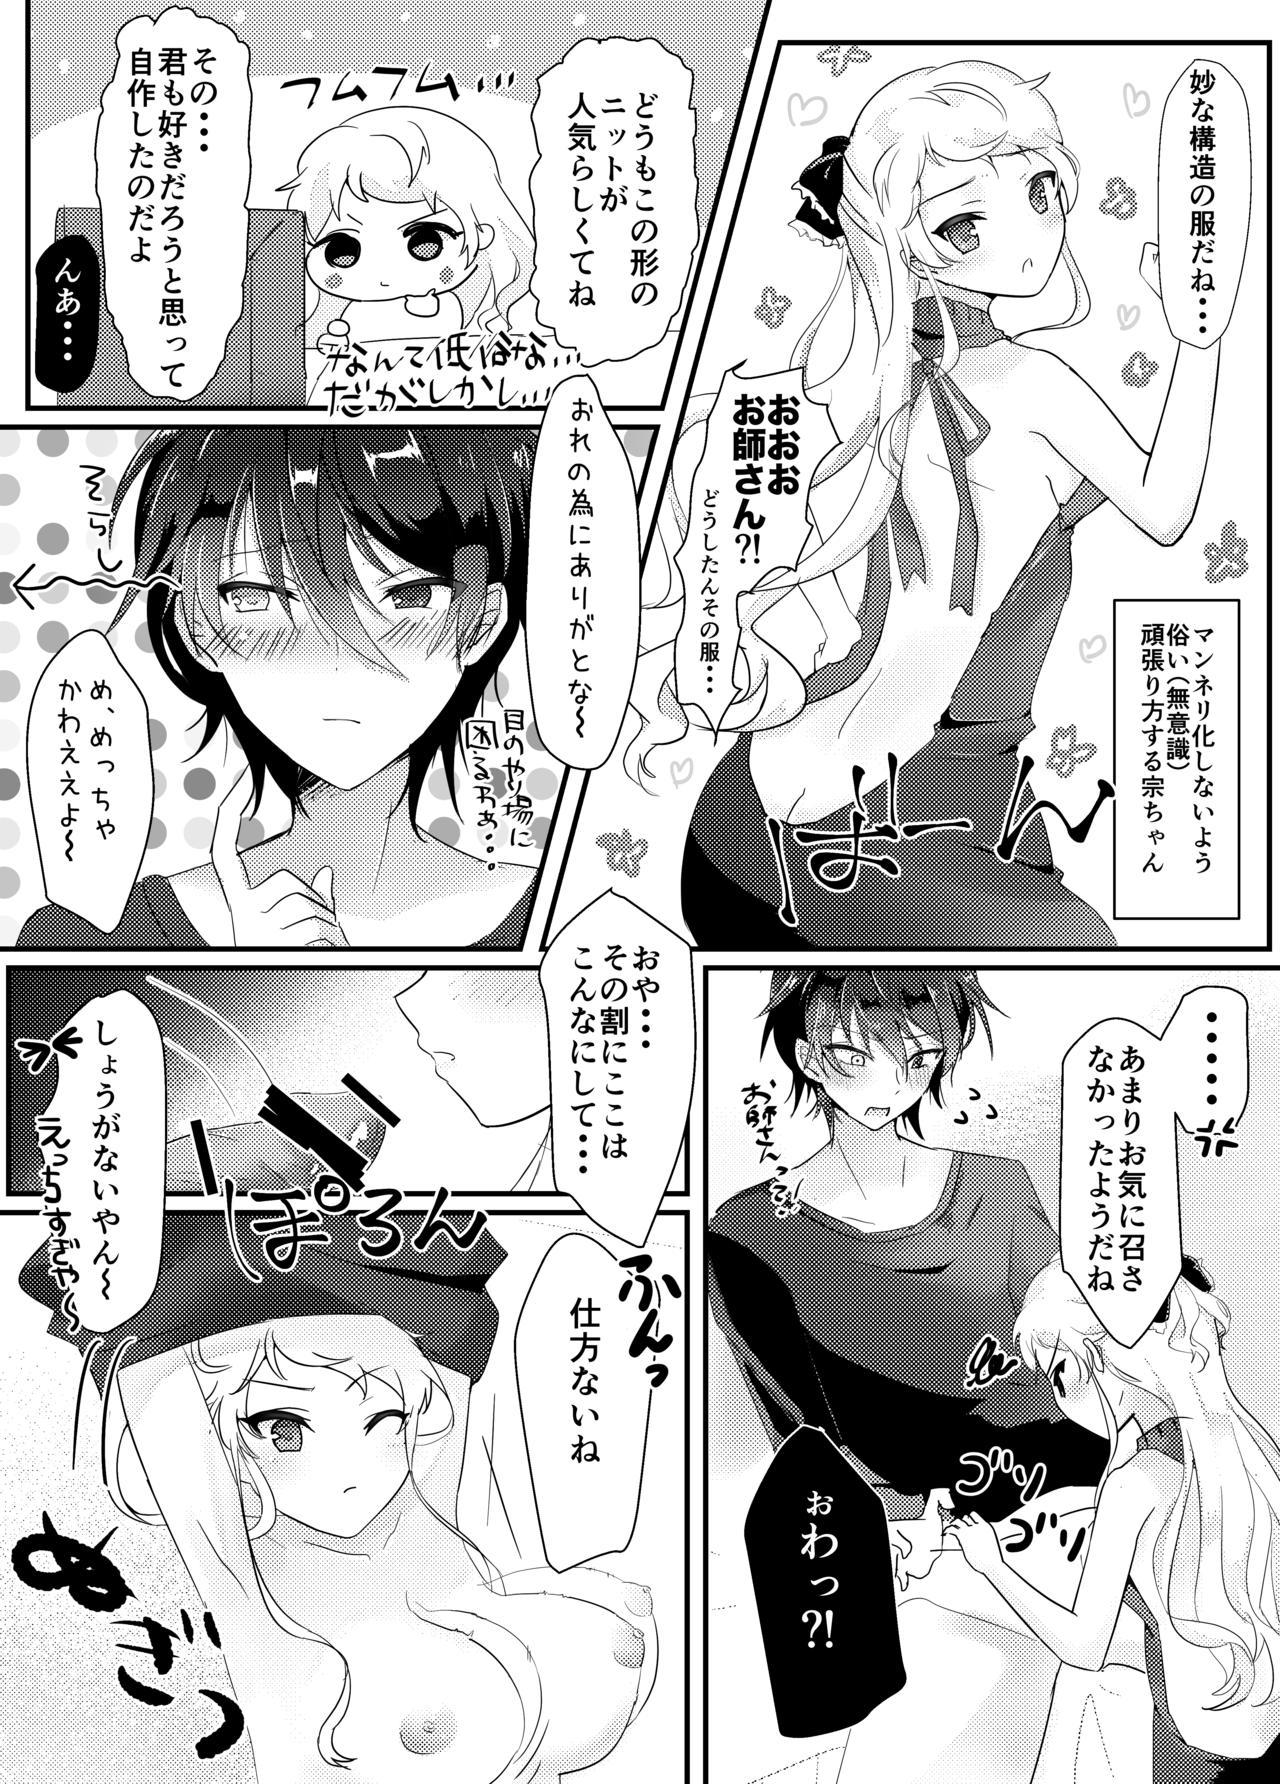 Whooty みか宗女体化コピ本 - Ensemble stars Uncensored - Page 8